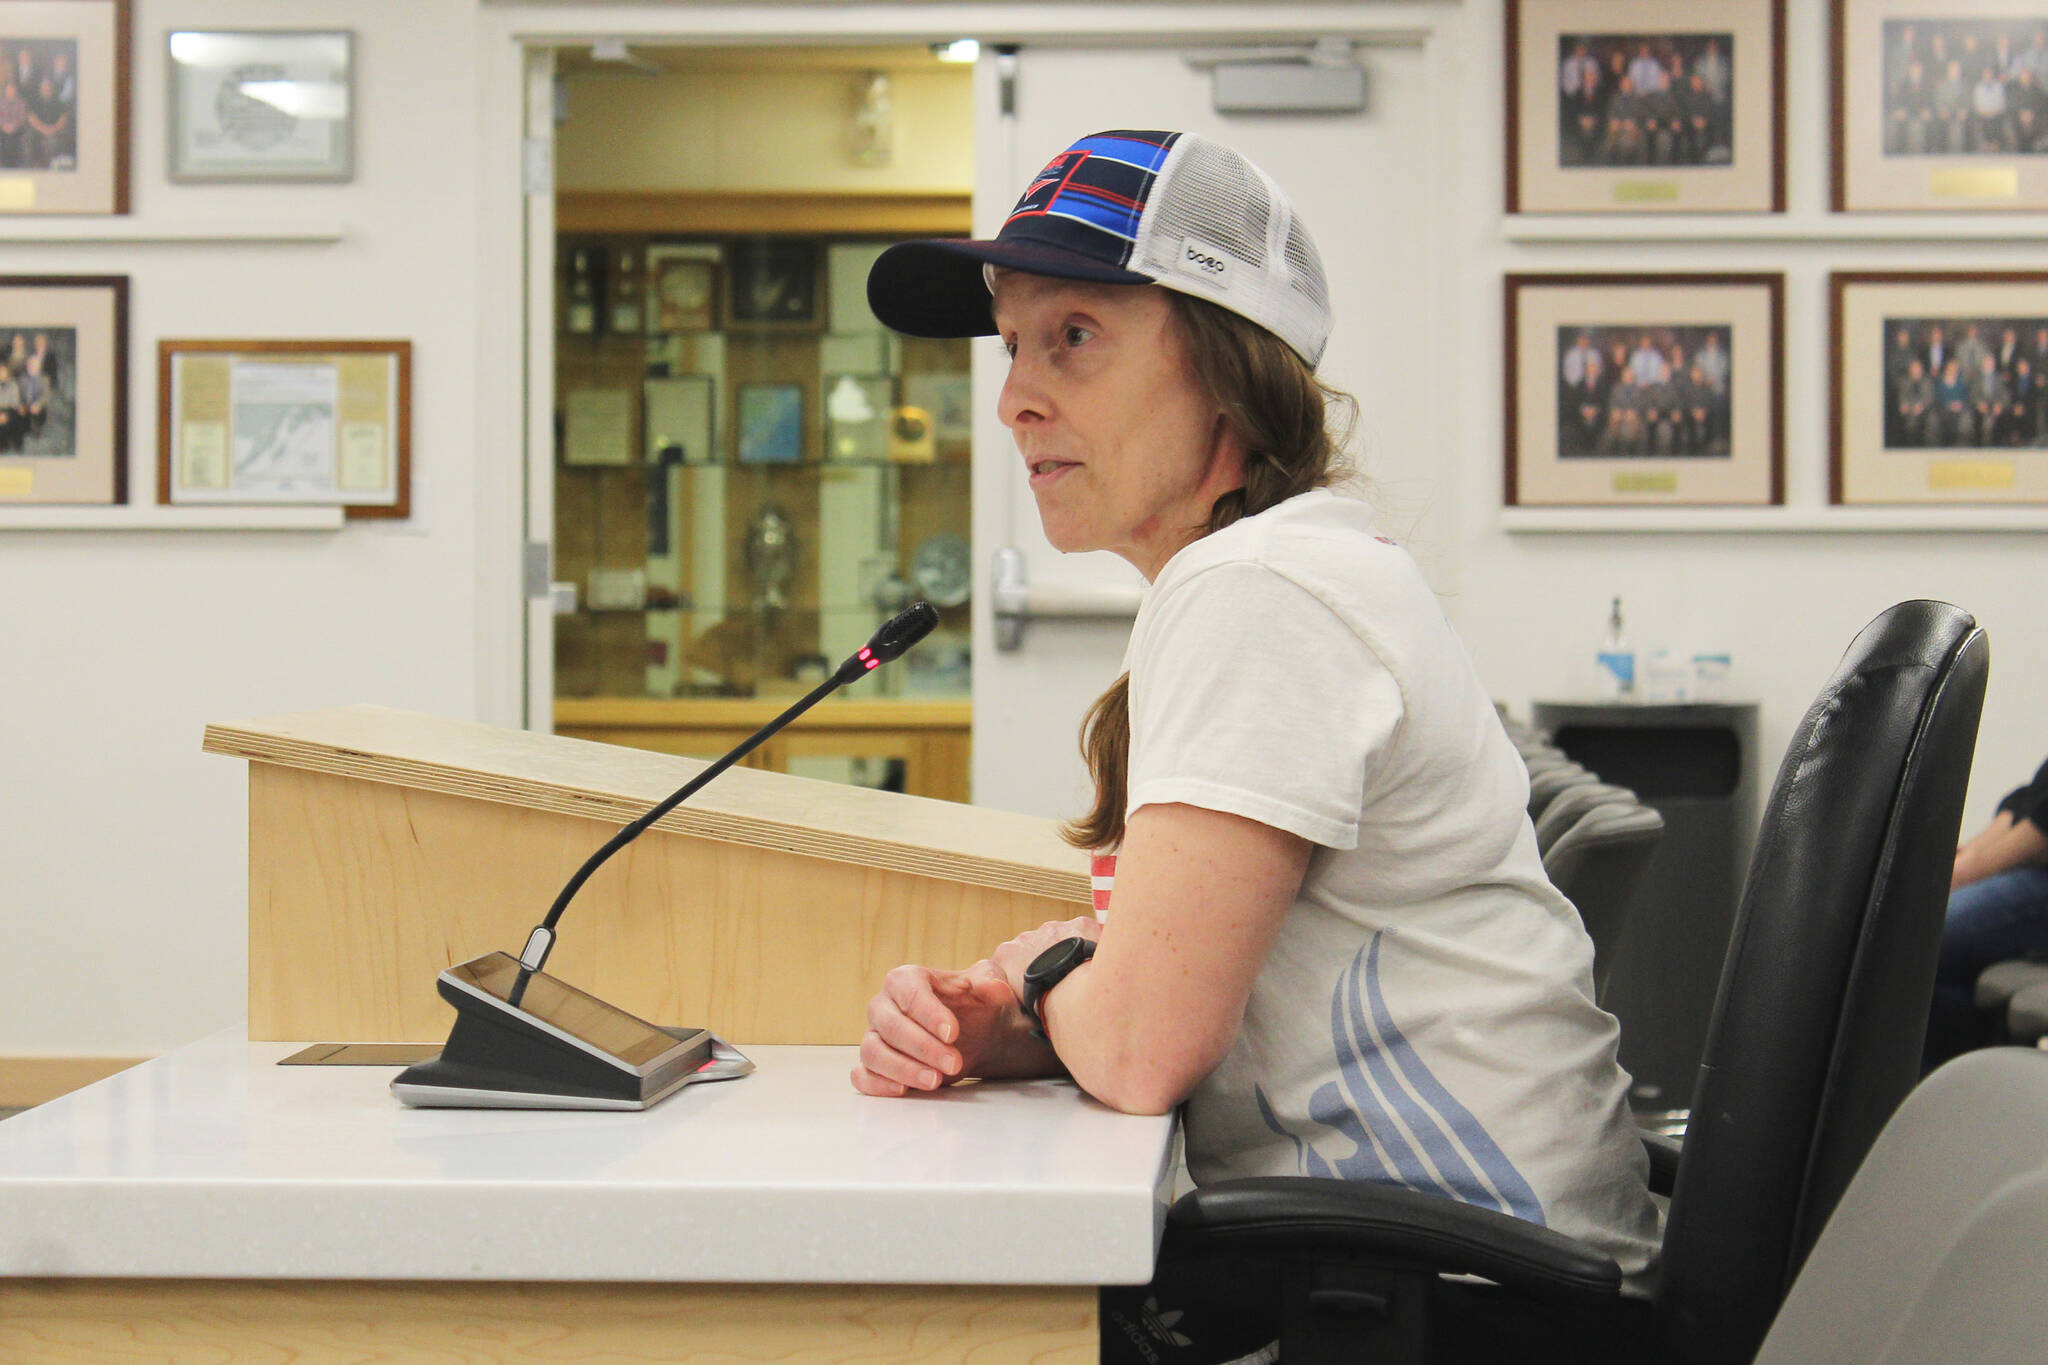 Swim coach Angie Brennan speaks in support of lower user fees for Kenai Peninsula Borough School District pools during a Board of Education meeting on Monday, March 14, 2022 in Soldotna, Alaska. (Ashlyn O’Hara/Peninsula Clarion)